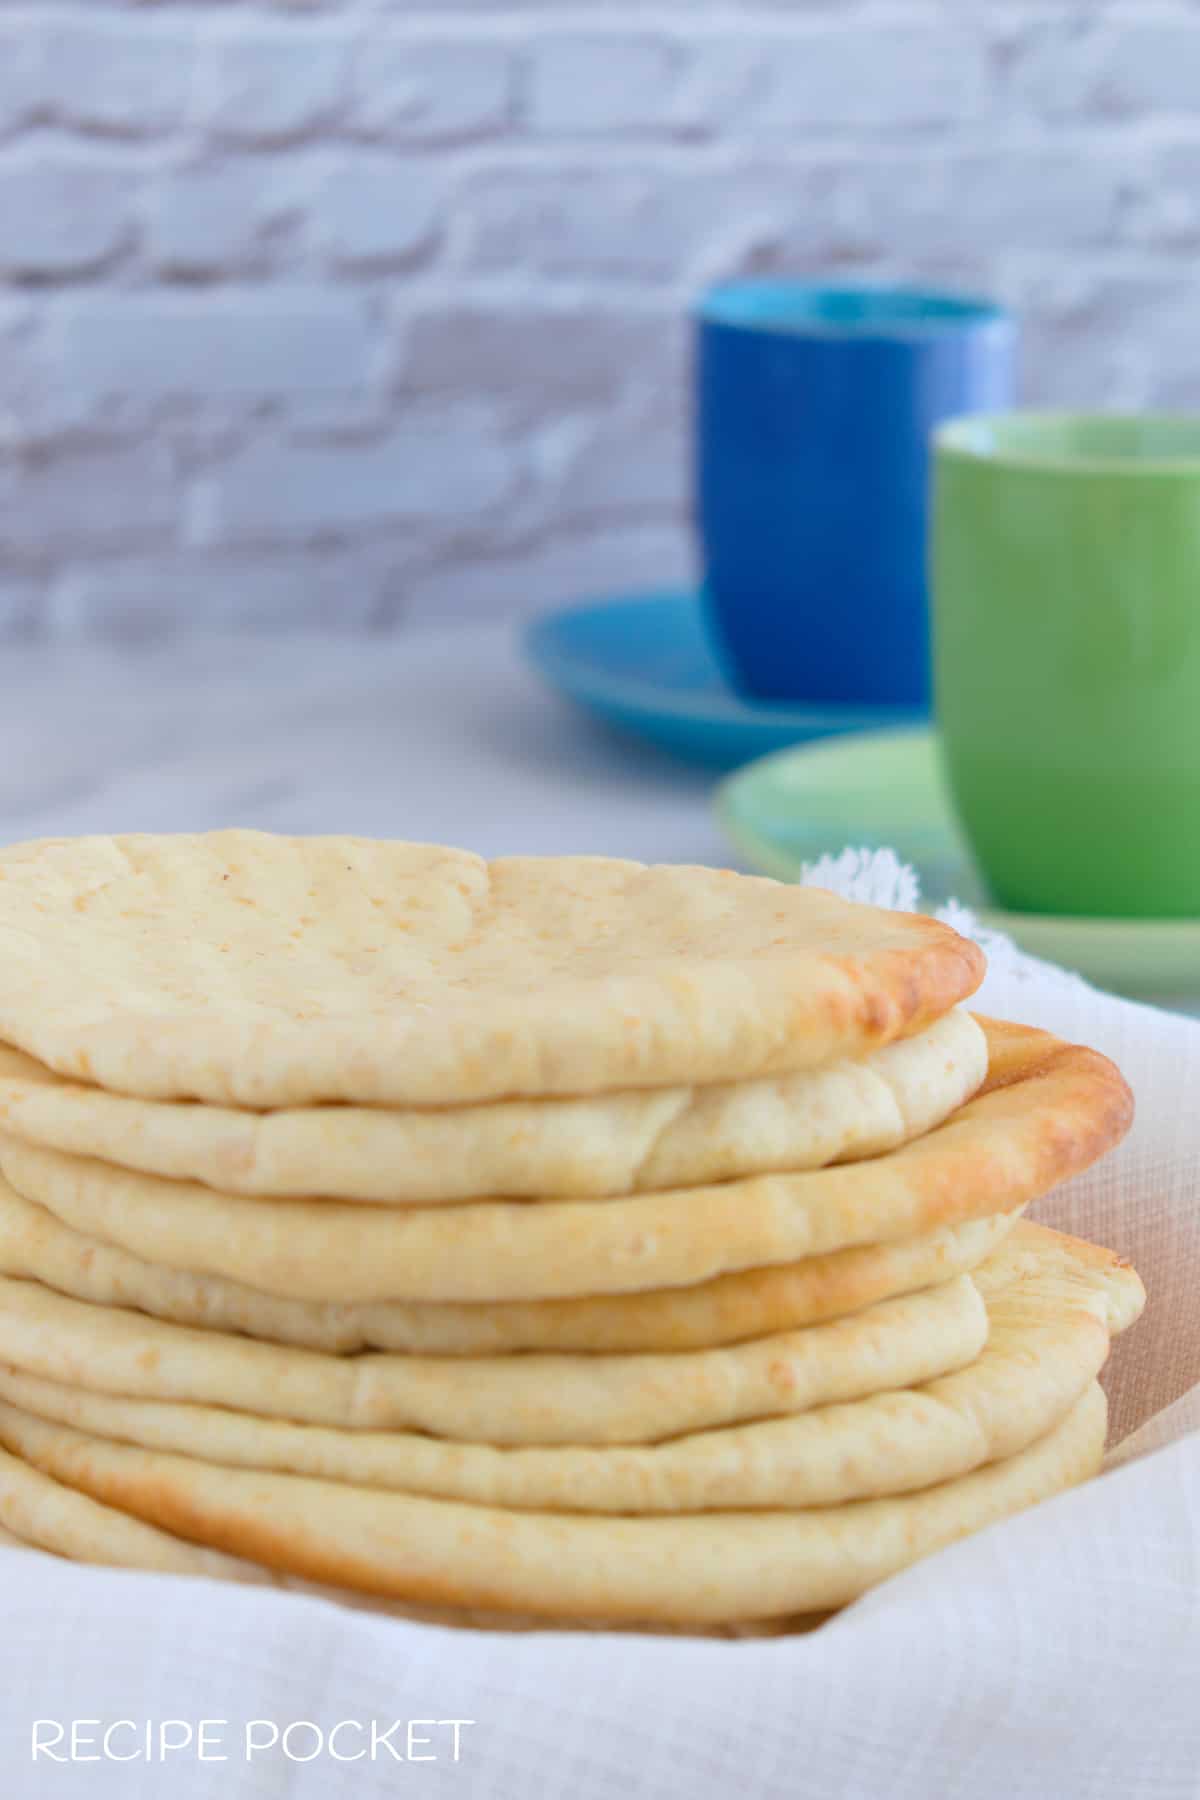 A stack of fresh pita bread on a table with blue and green mugs in the background.